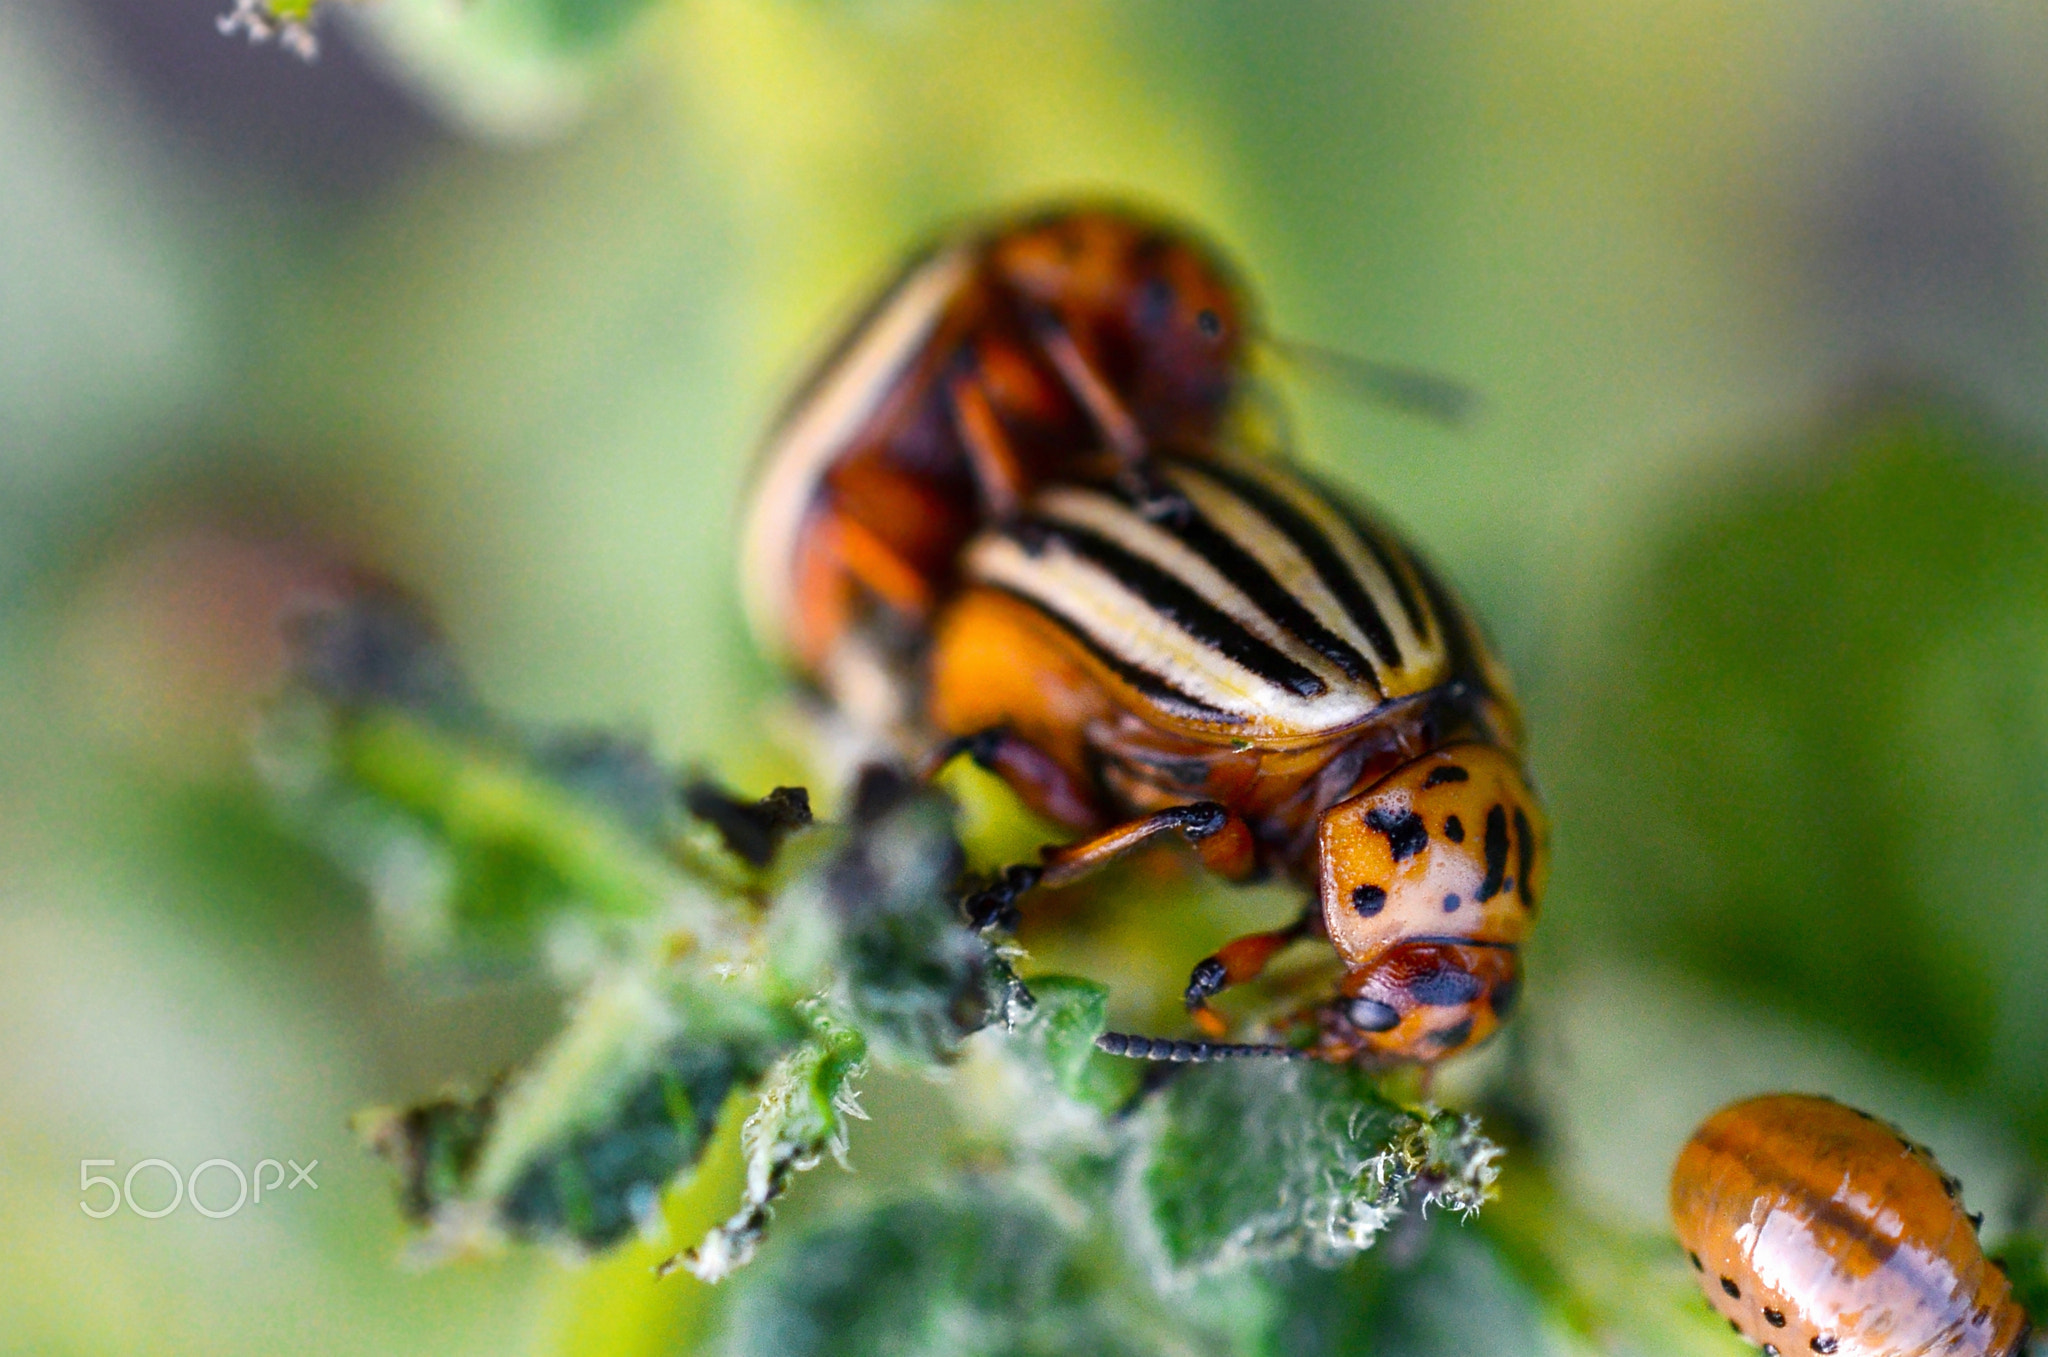 Colorado beetles mating during the sitting on a potato bush